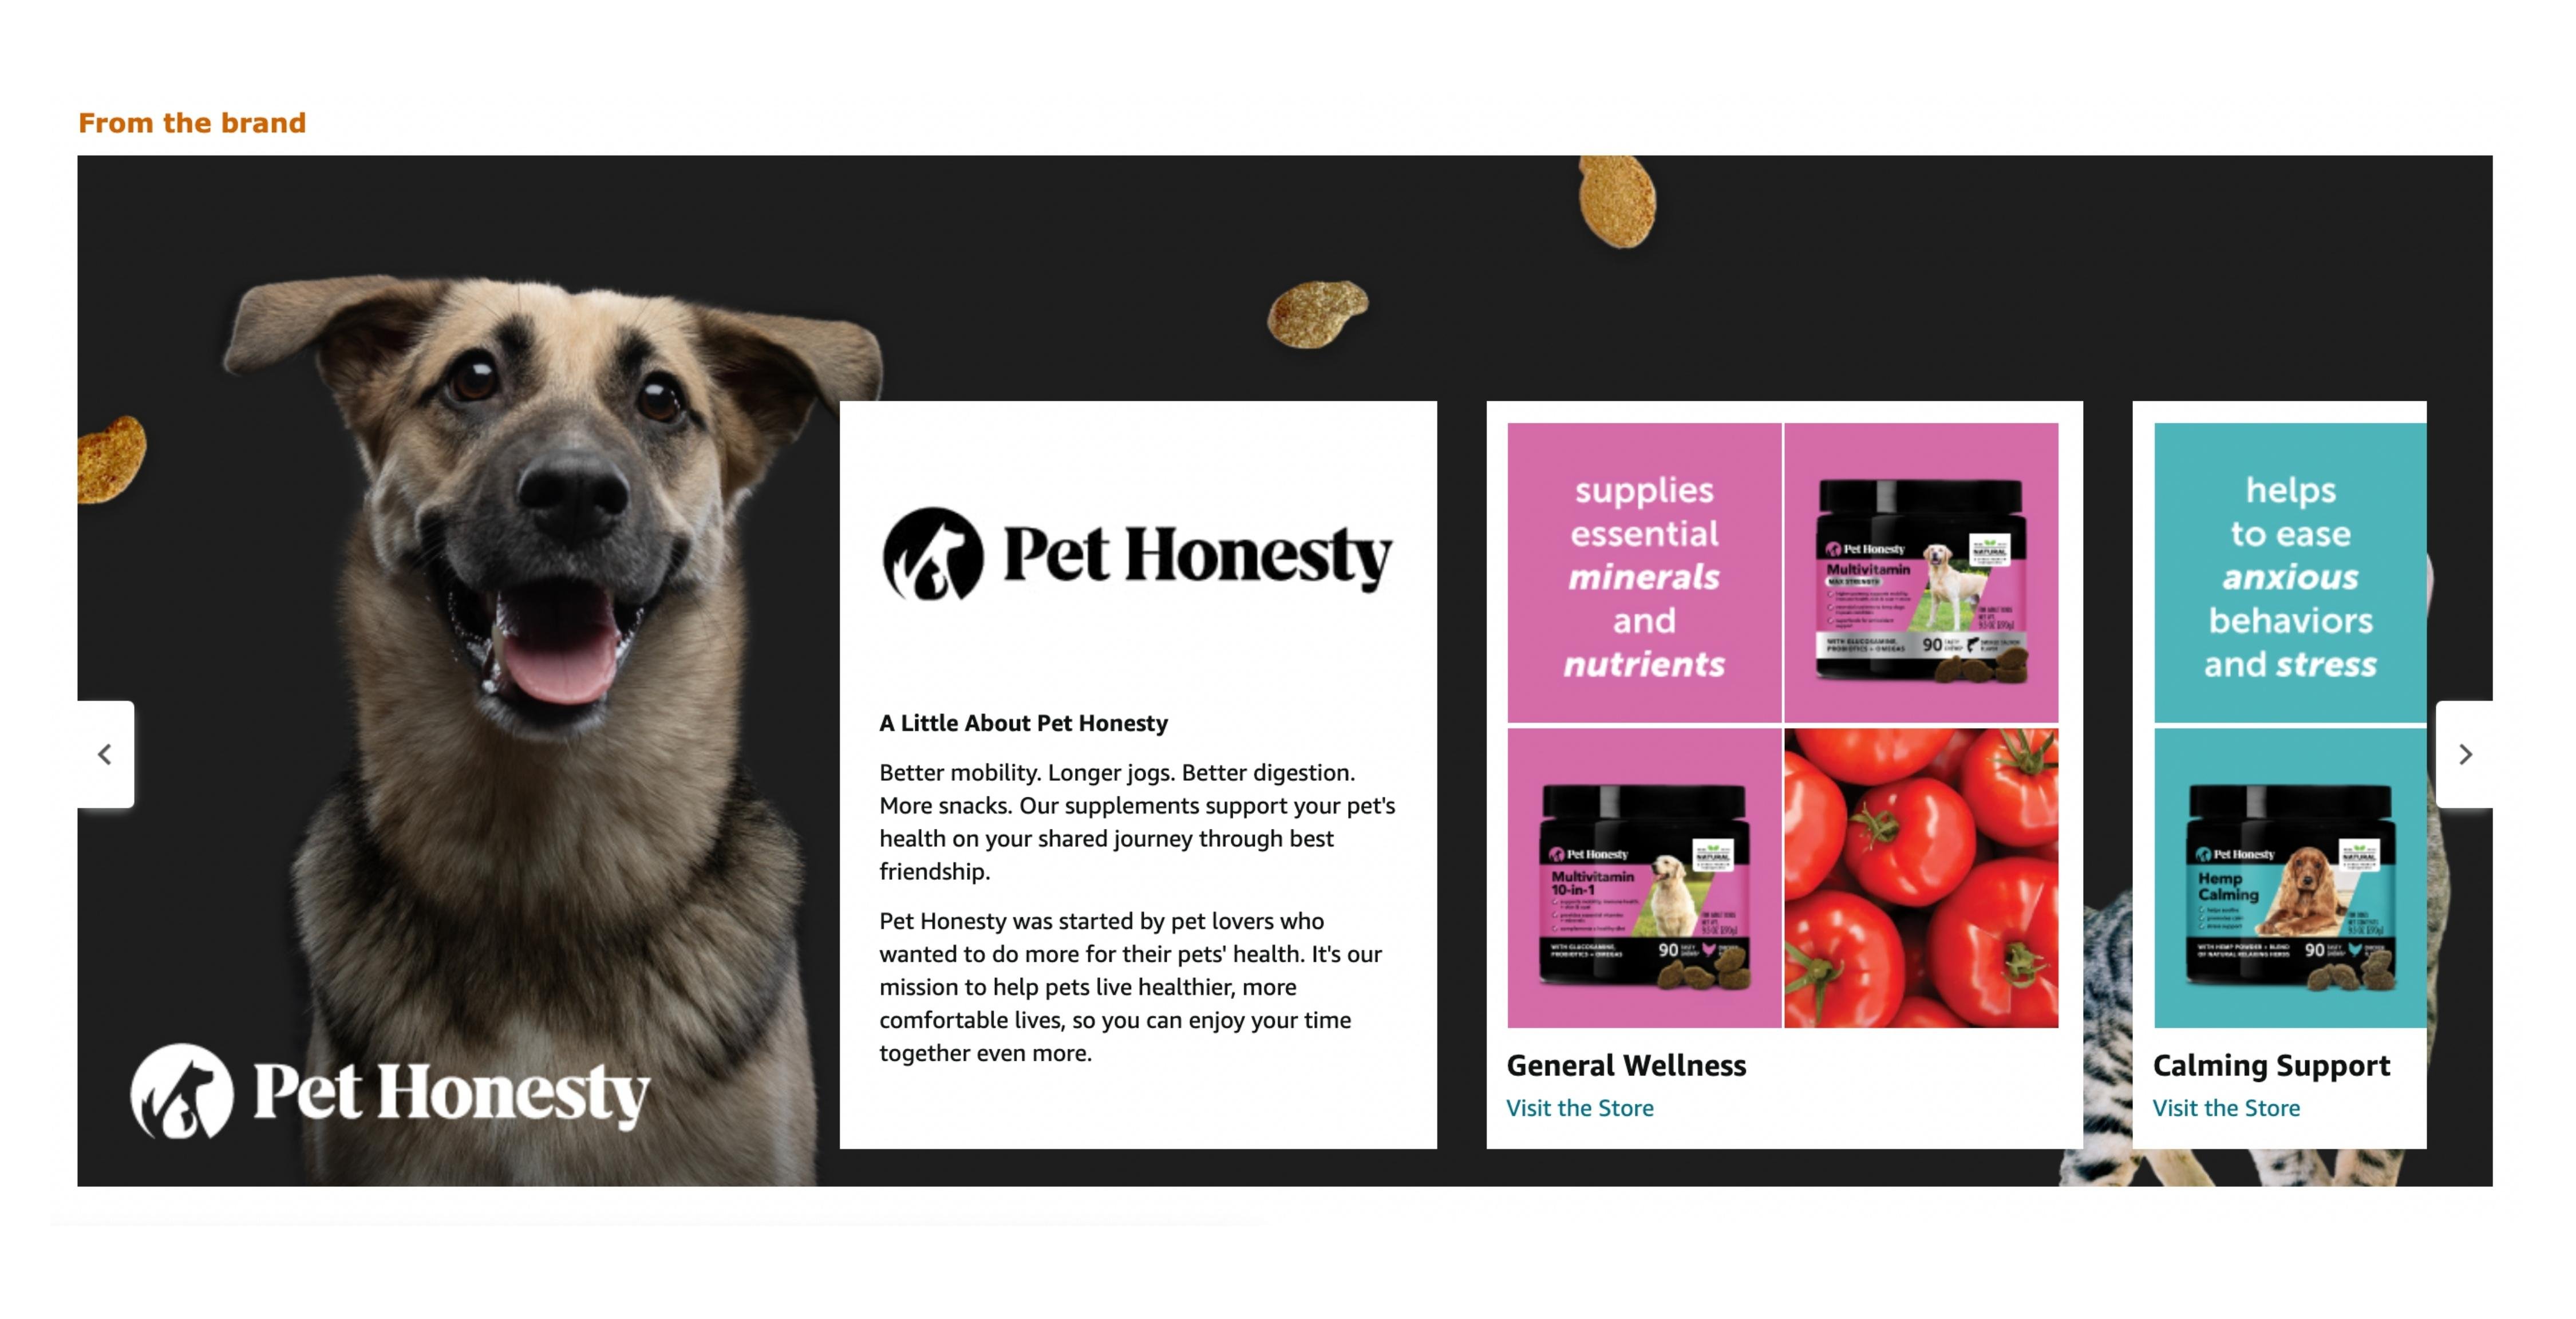 pet-honesty-from-the-brand